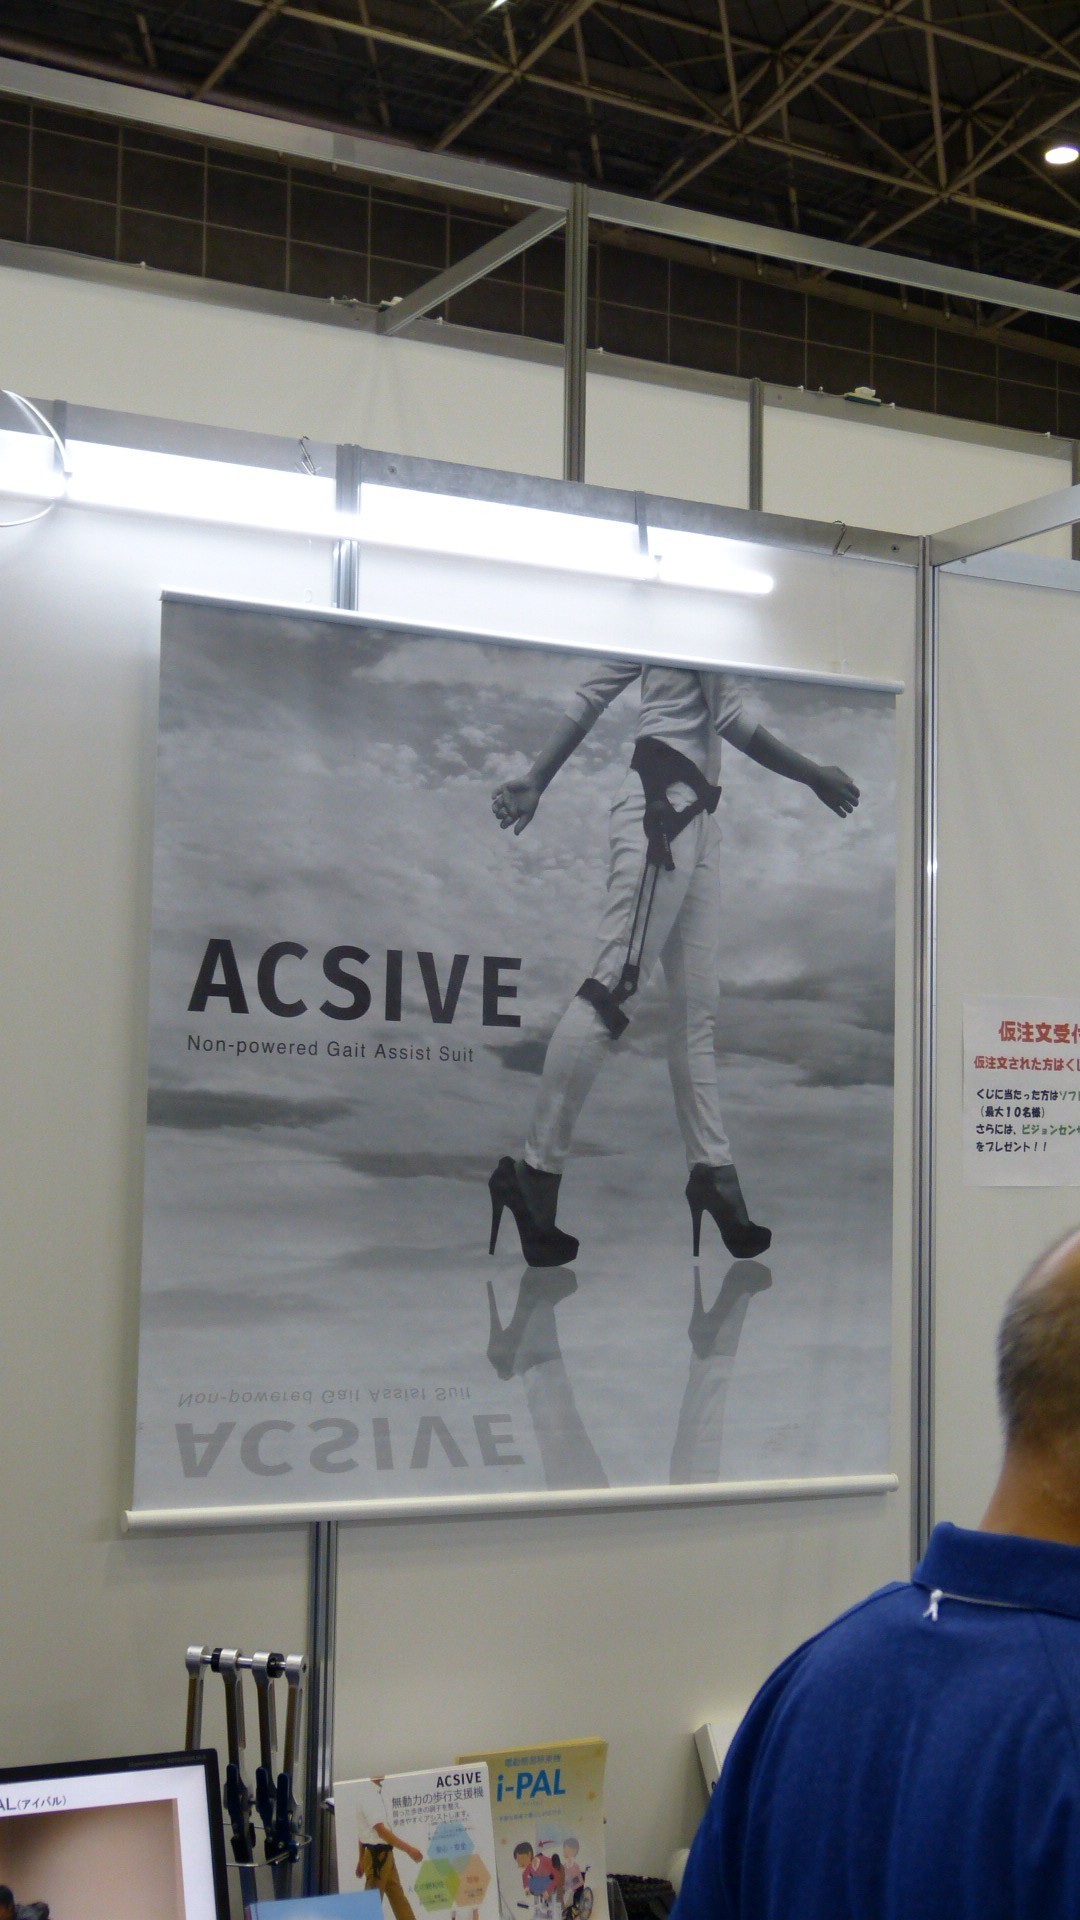 a poster depicts a woman's body walking in high heeled shoes with a brace around her waist and one of her legs, below the knee.  Text reads Acsive non-powered gait assist suit